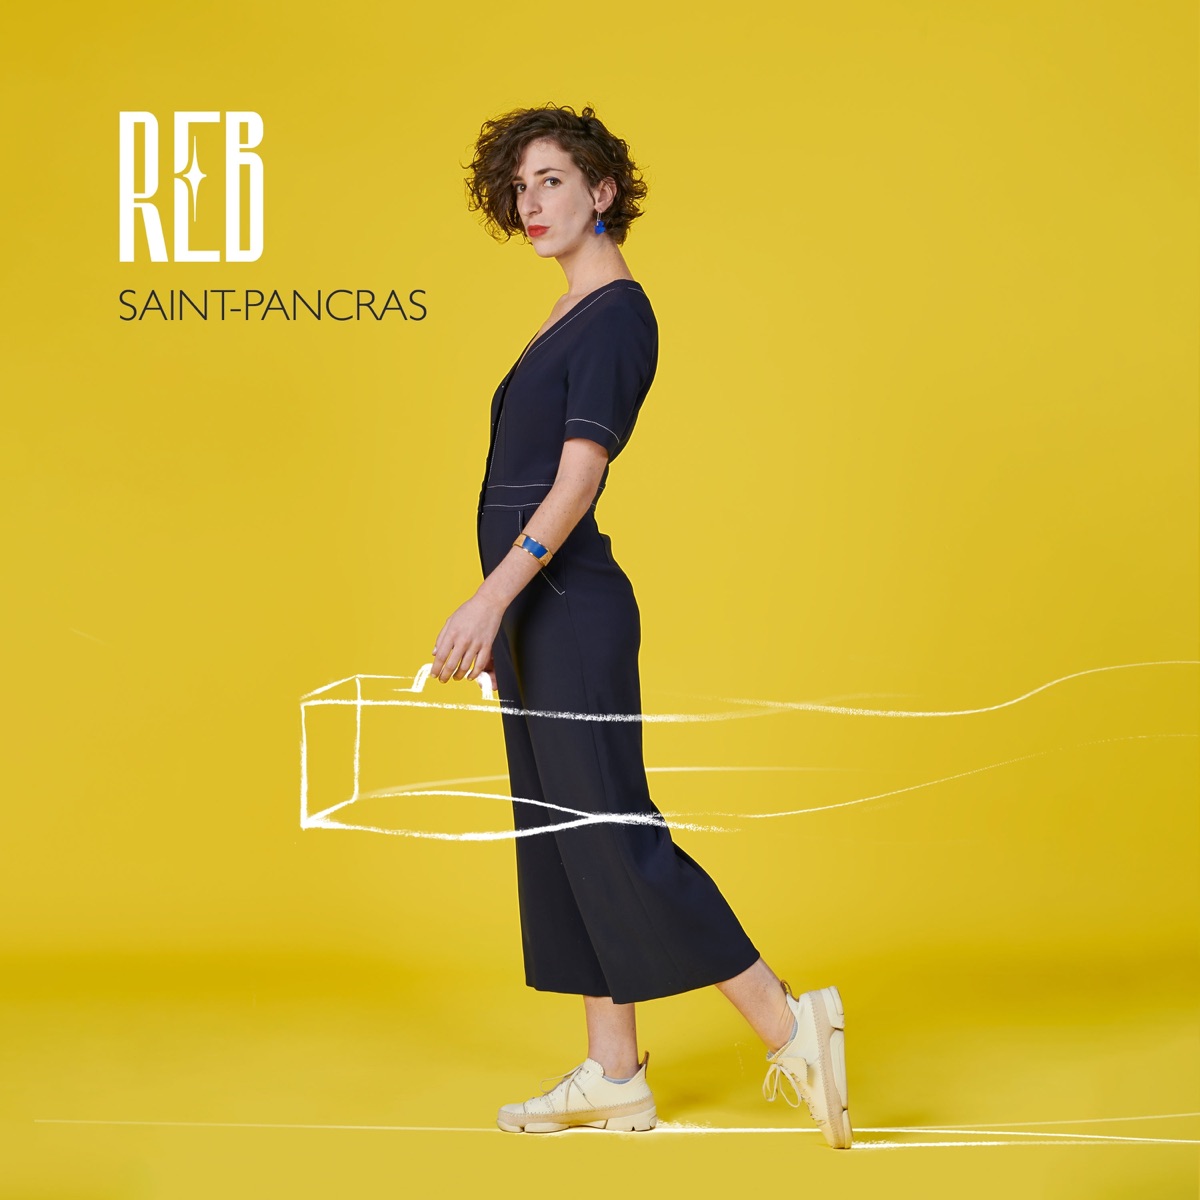 Ici et Maintenant - Single by REB on Apple Music